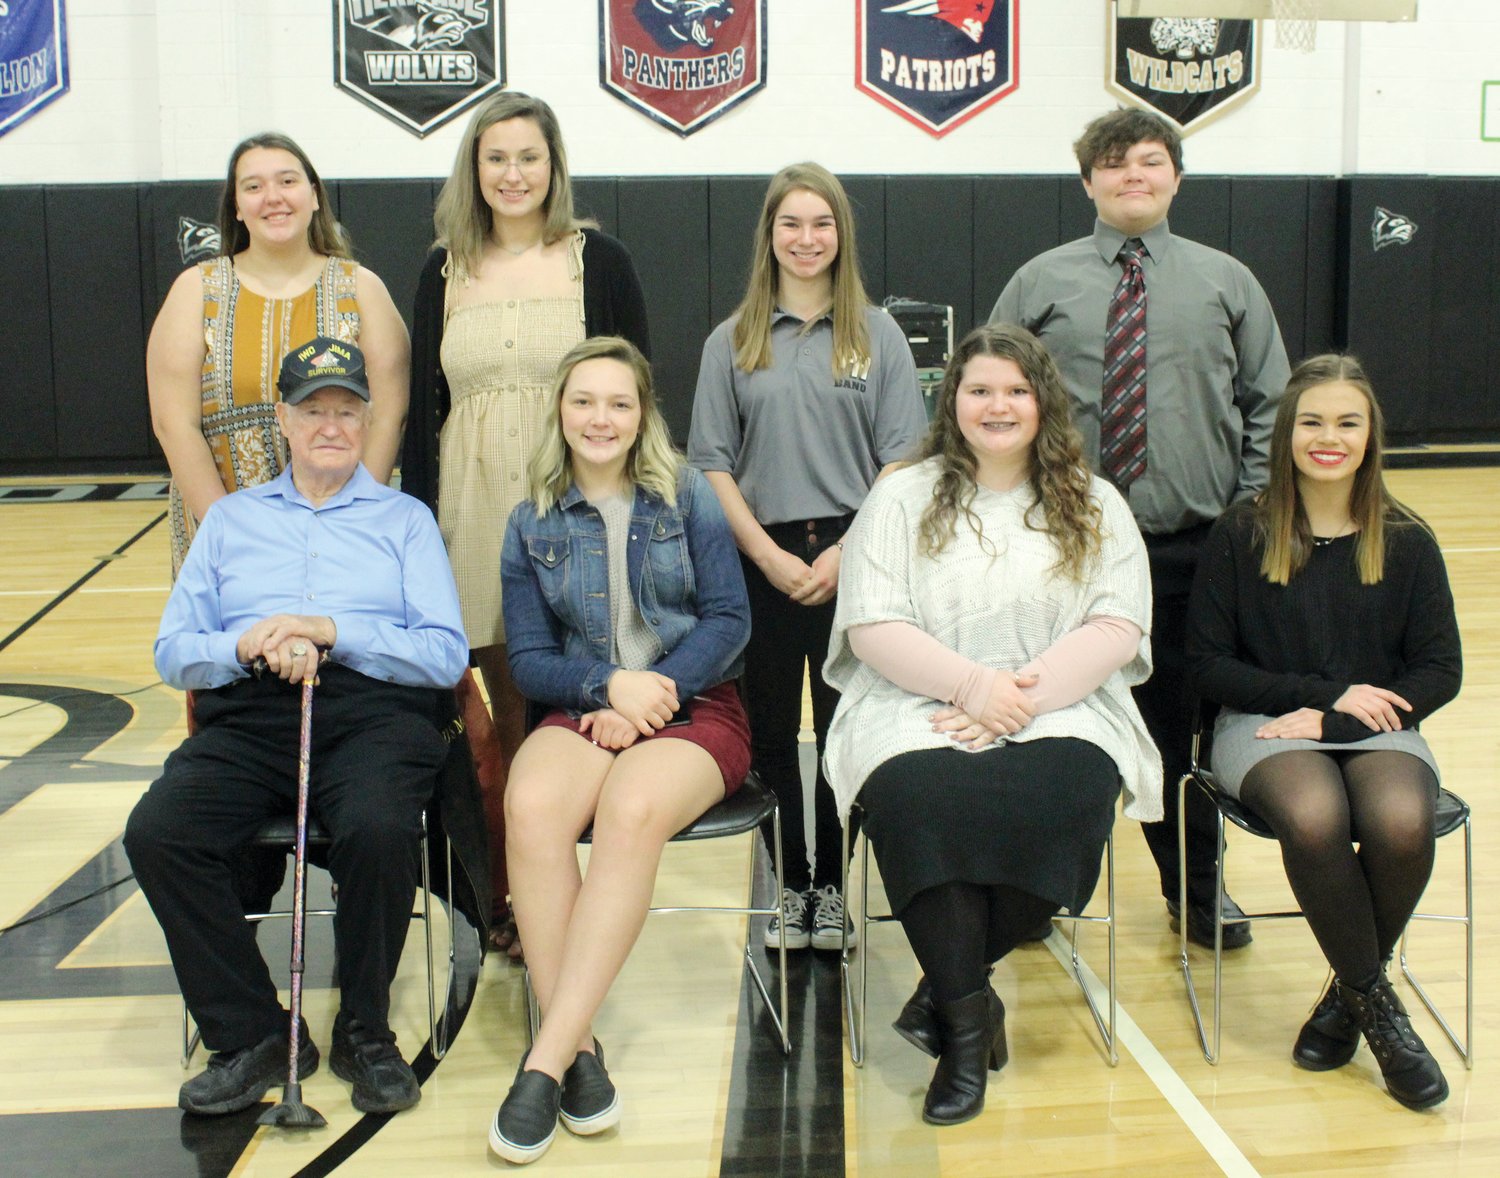 Participants in the Parke Heritage High School Veterans Day program were, from left, front row, guest speaker Leighton Wilhite, Natalie Jones, Macy Kent and Jasmyne Everson; and back row, Megan Query, Stella Mrazik, Ava Barger and Xander Brown.